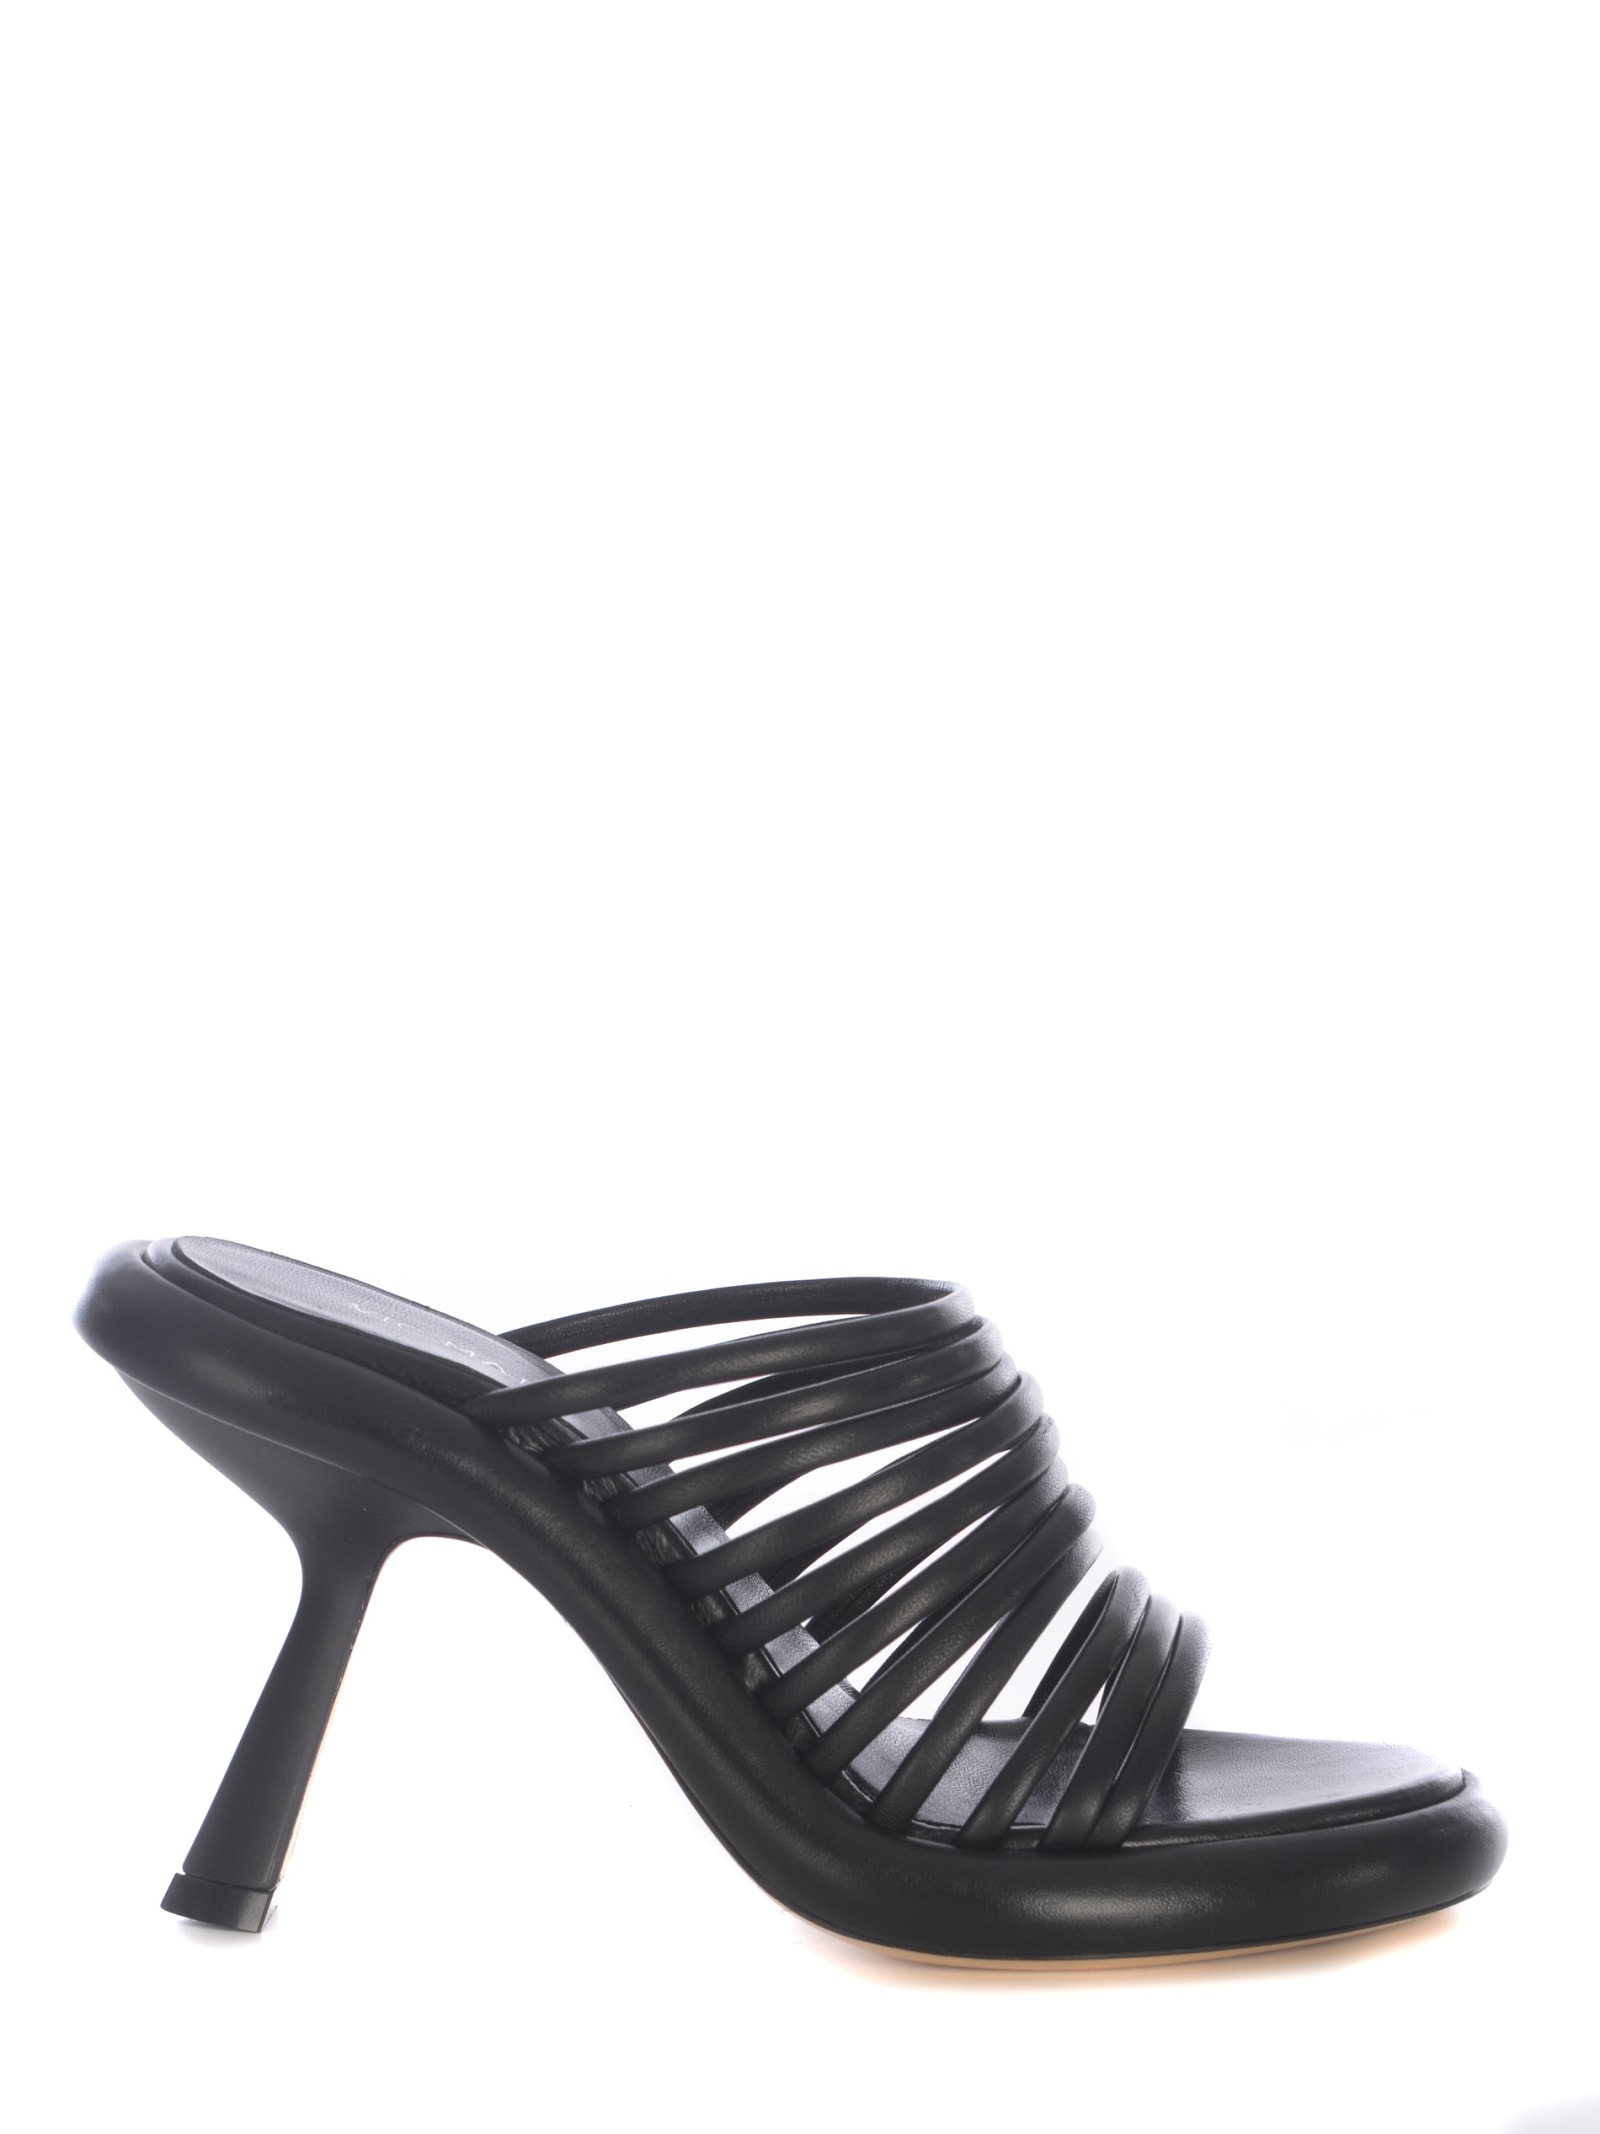 Vic Matie Sandal Vic Matié Dosh Made Of Nappa In Black